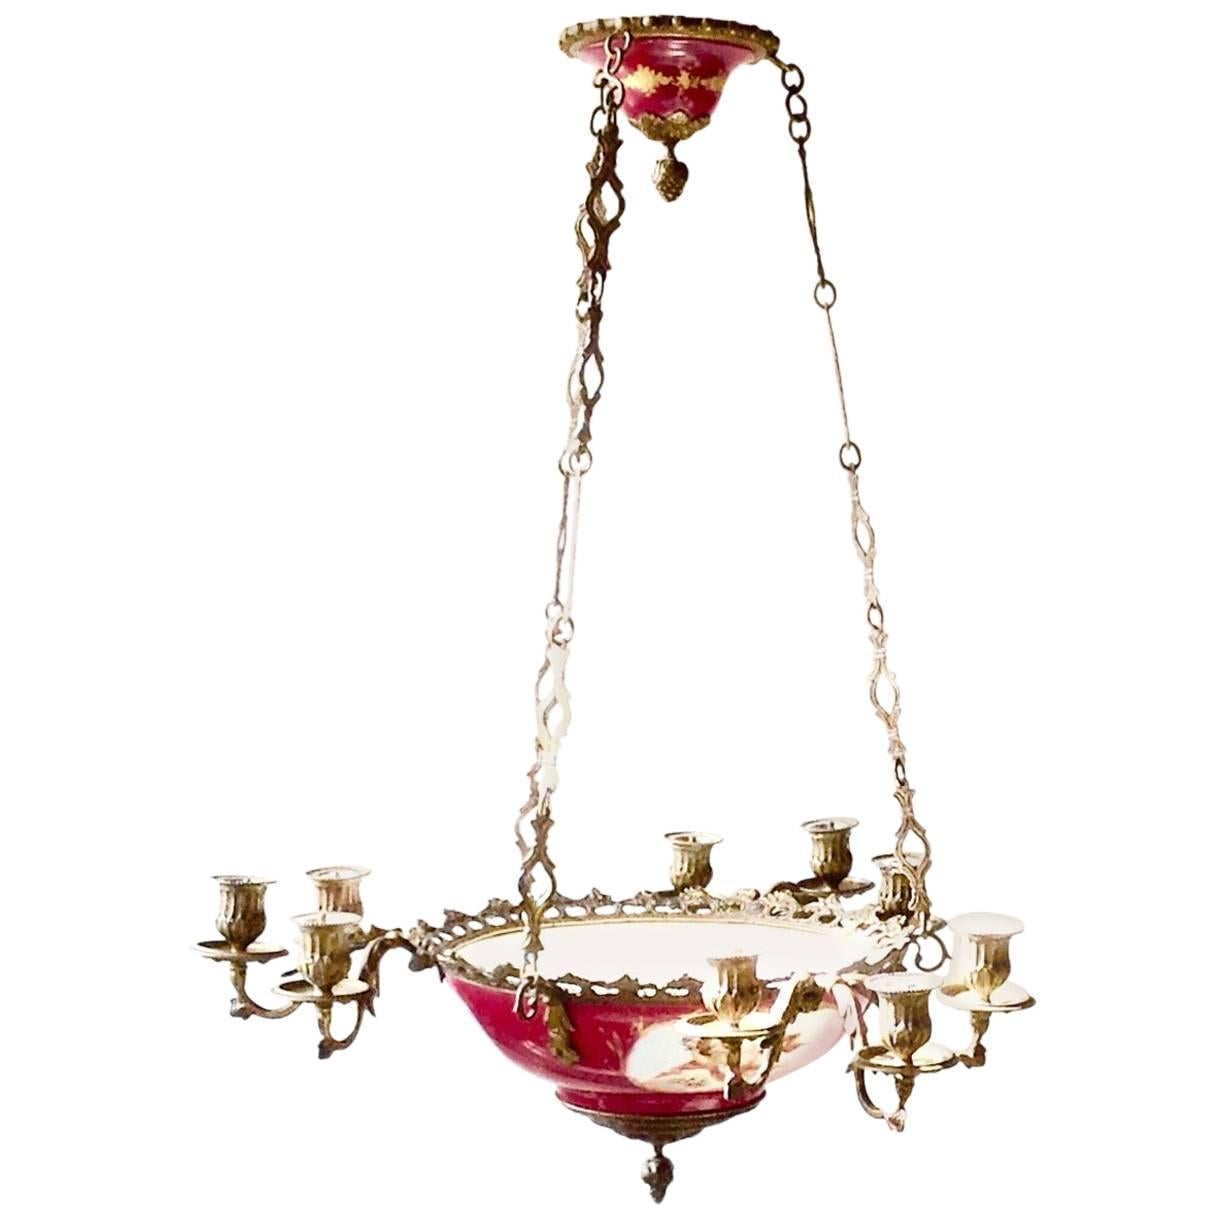 Early 1800s French Sèvres Porcelain Regency Empire Chandelier For Sale